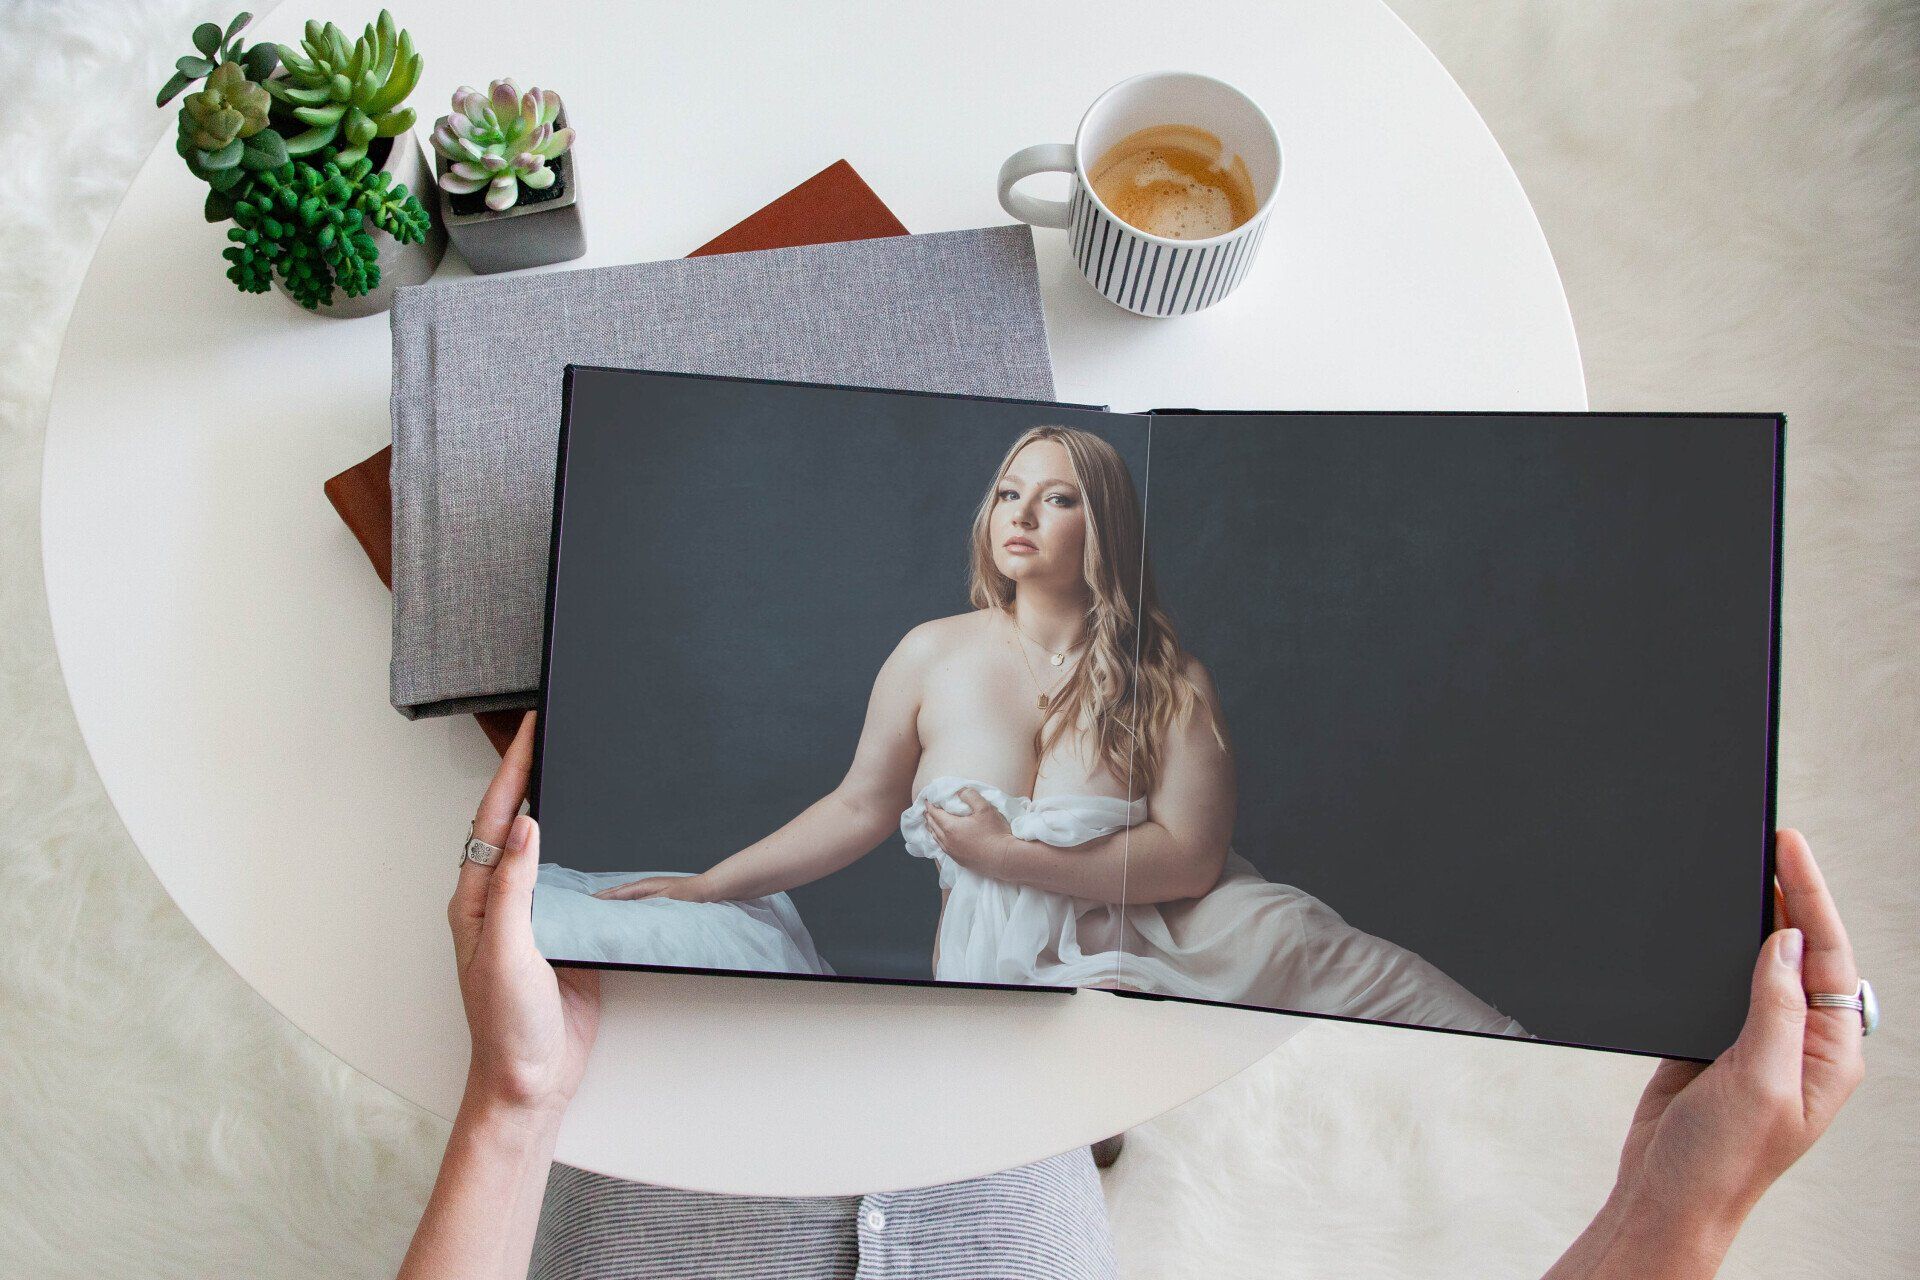 A photo book with a woman in a white dress